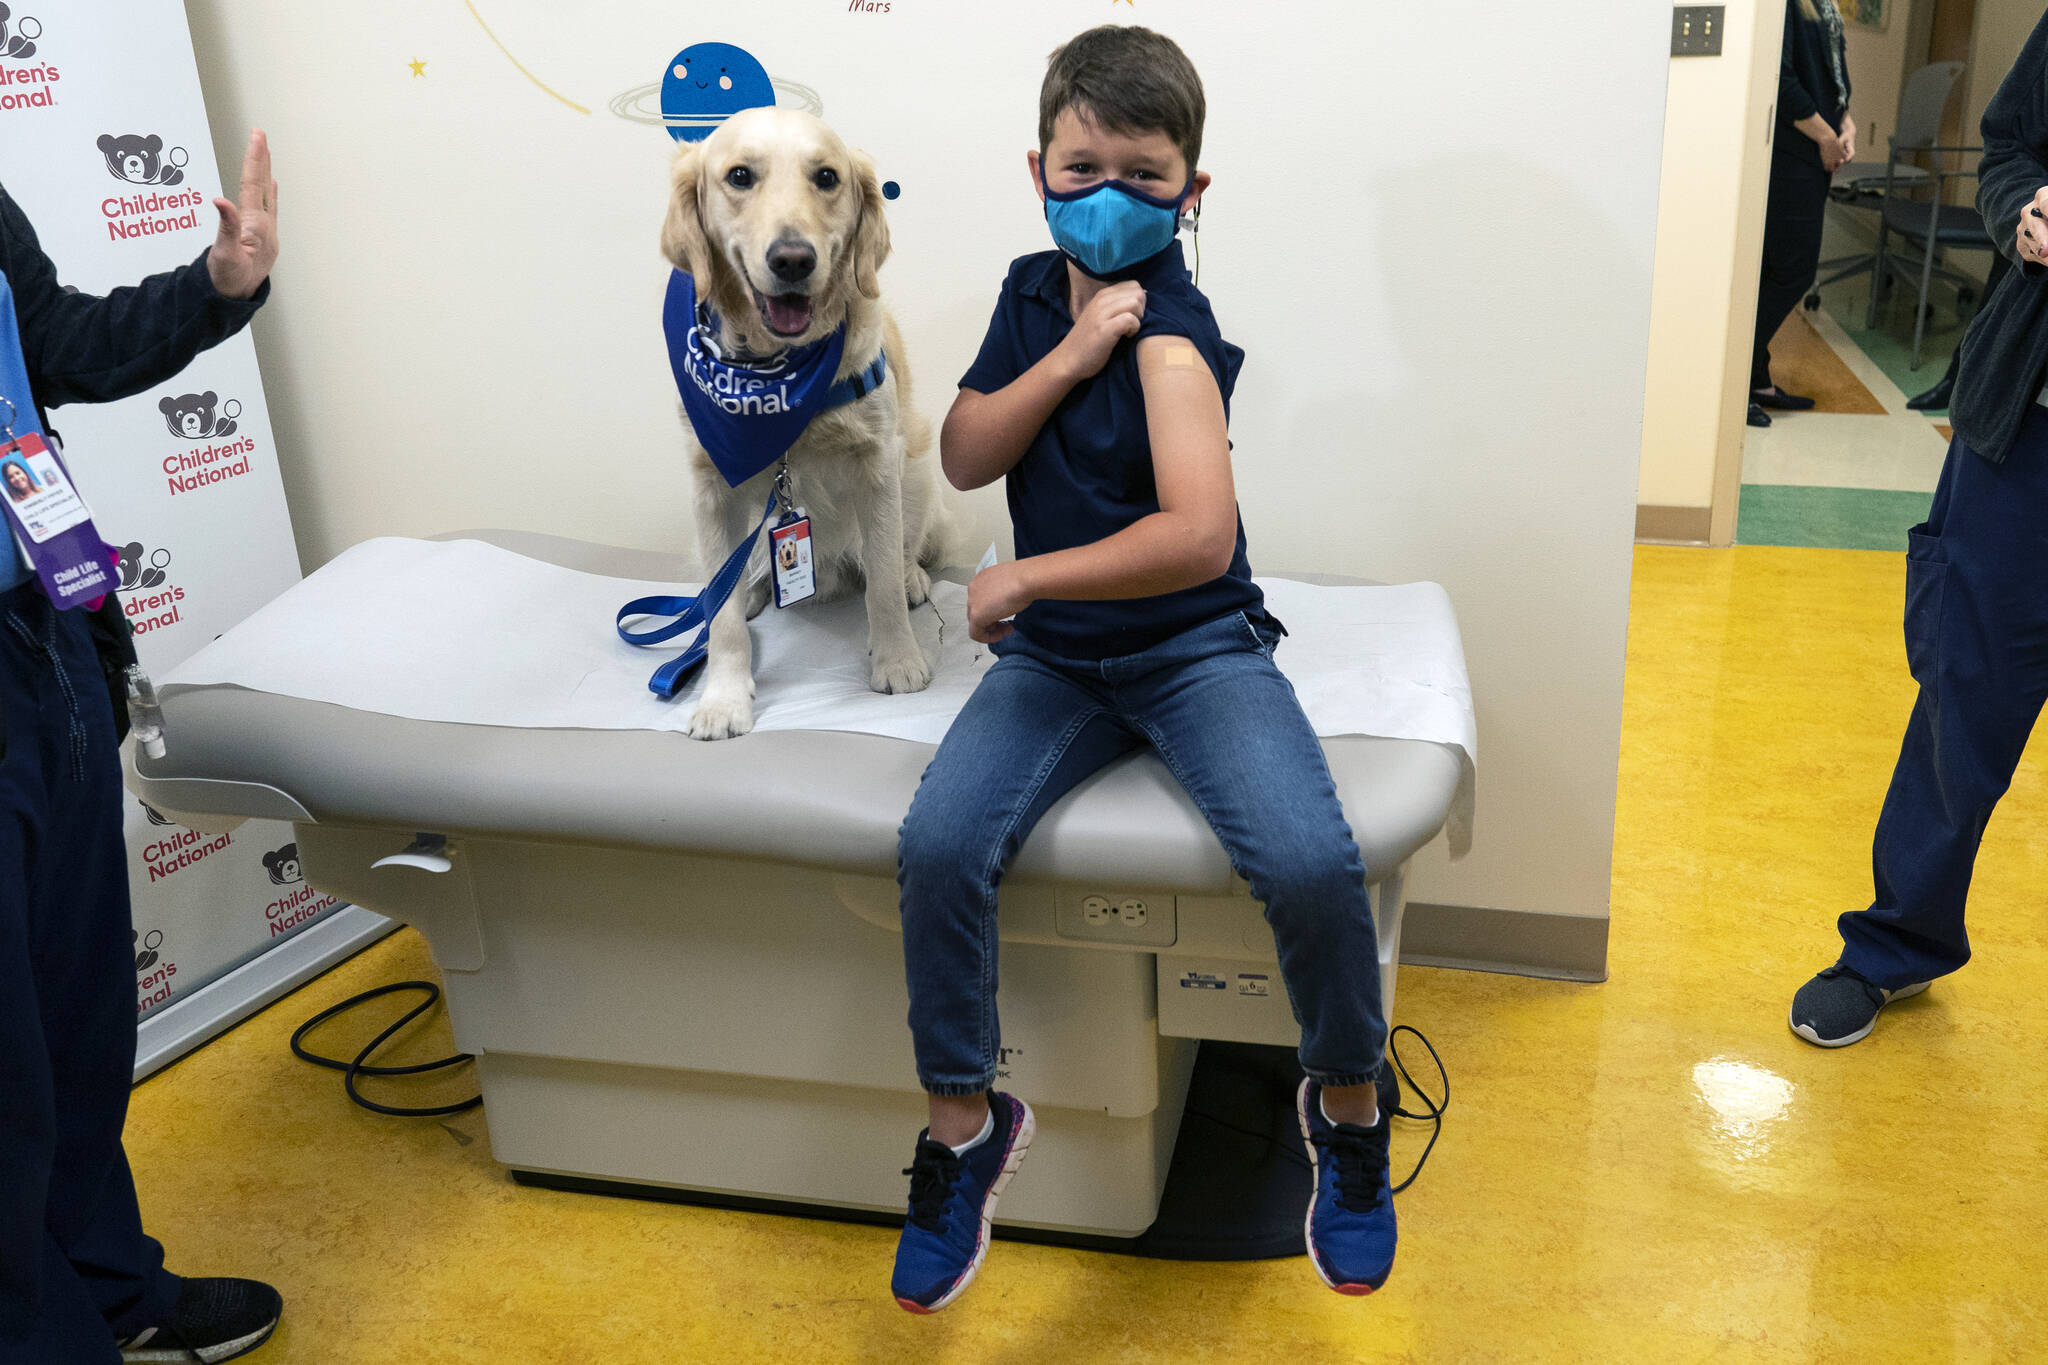 Carter Giglio, 8, joined by service dog Barney of Hero Dogs, shows off the bandaid over his injection site after being vaccinated, Wednesday, Nov. 3, 2021, at Children’s National Hospital in Washington. The U.S. enters a new phase Wednesday in its COVID-19 vaccination campaign, with shots now available to millions of elementary-age children in what health officials hailed as a major breakthrough after more than 18 months of illness, hospitalizations, deaths and disrupted education. (AP Photo/Carolyn Kaster)